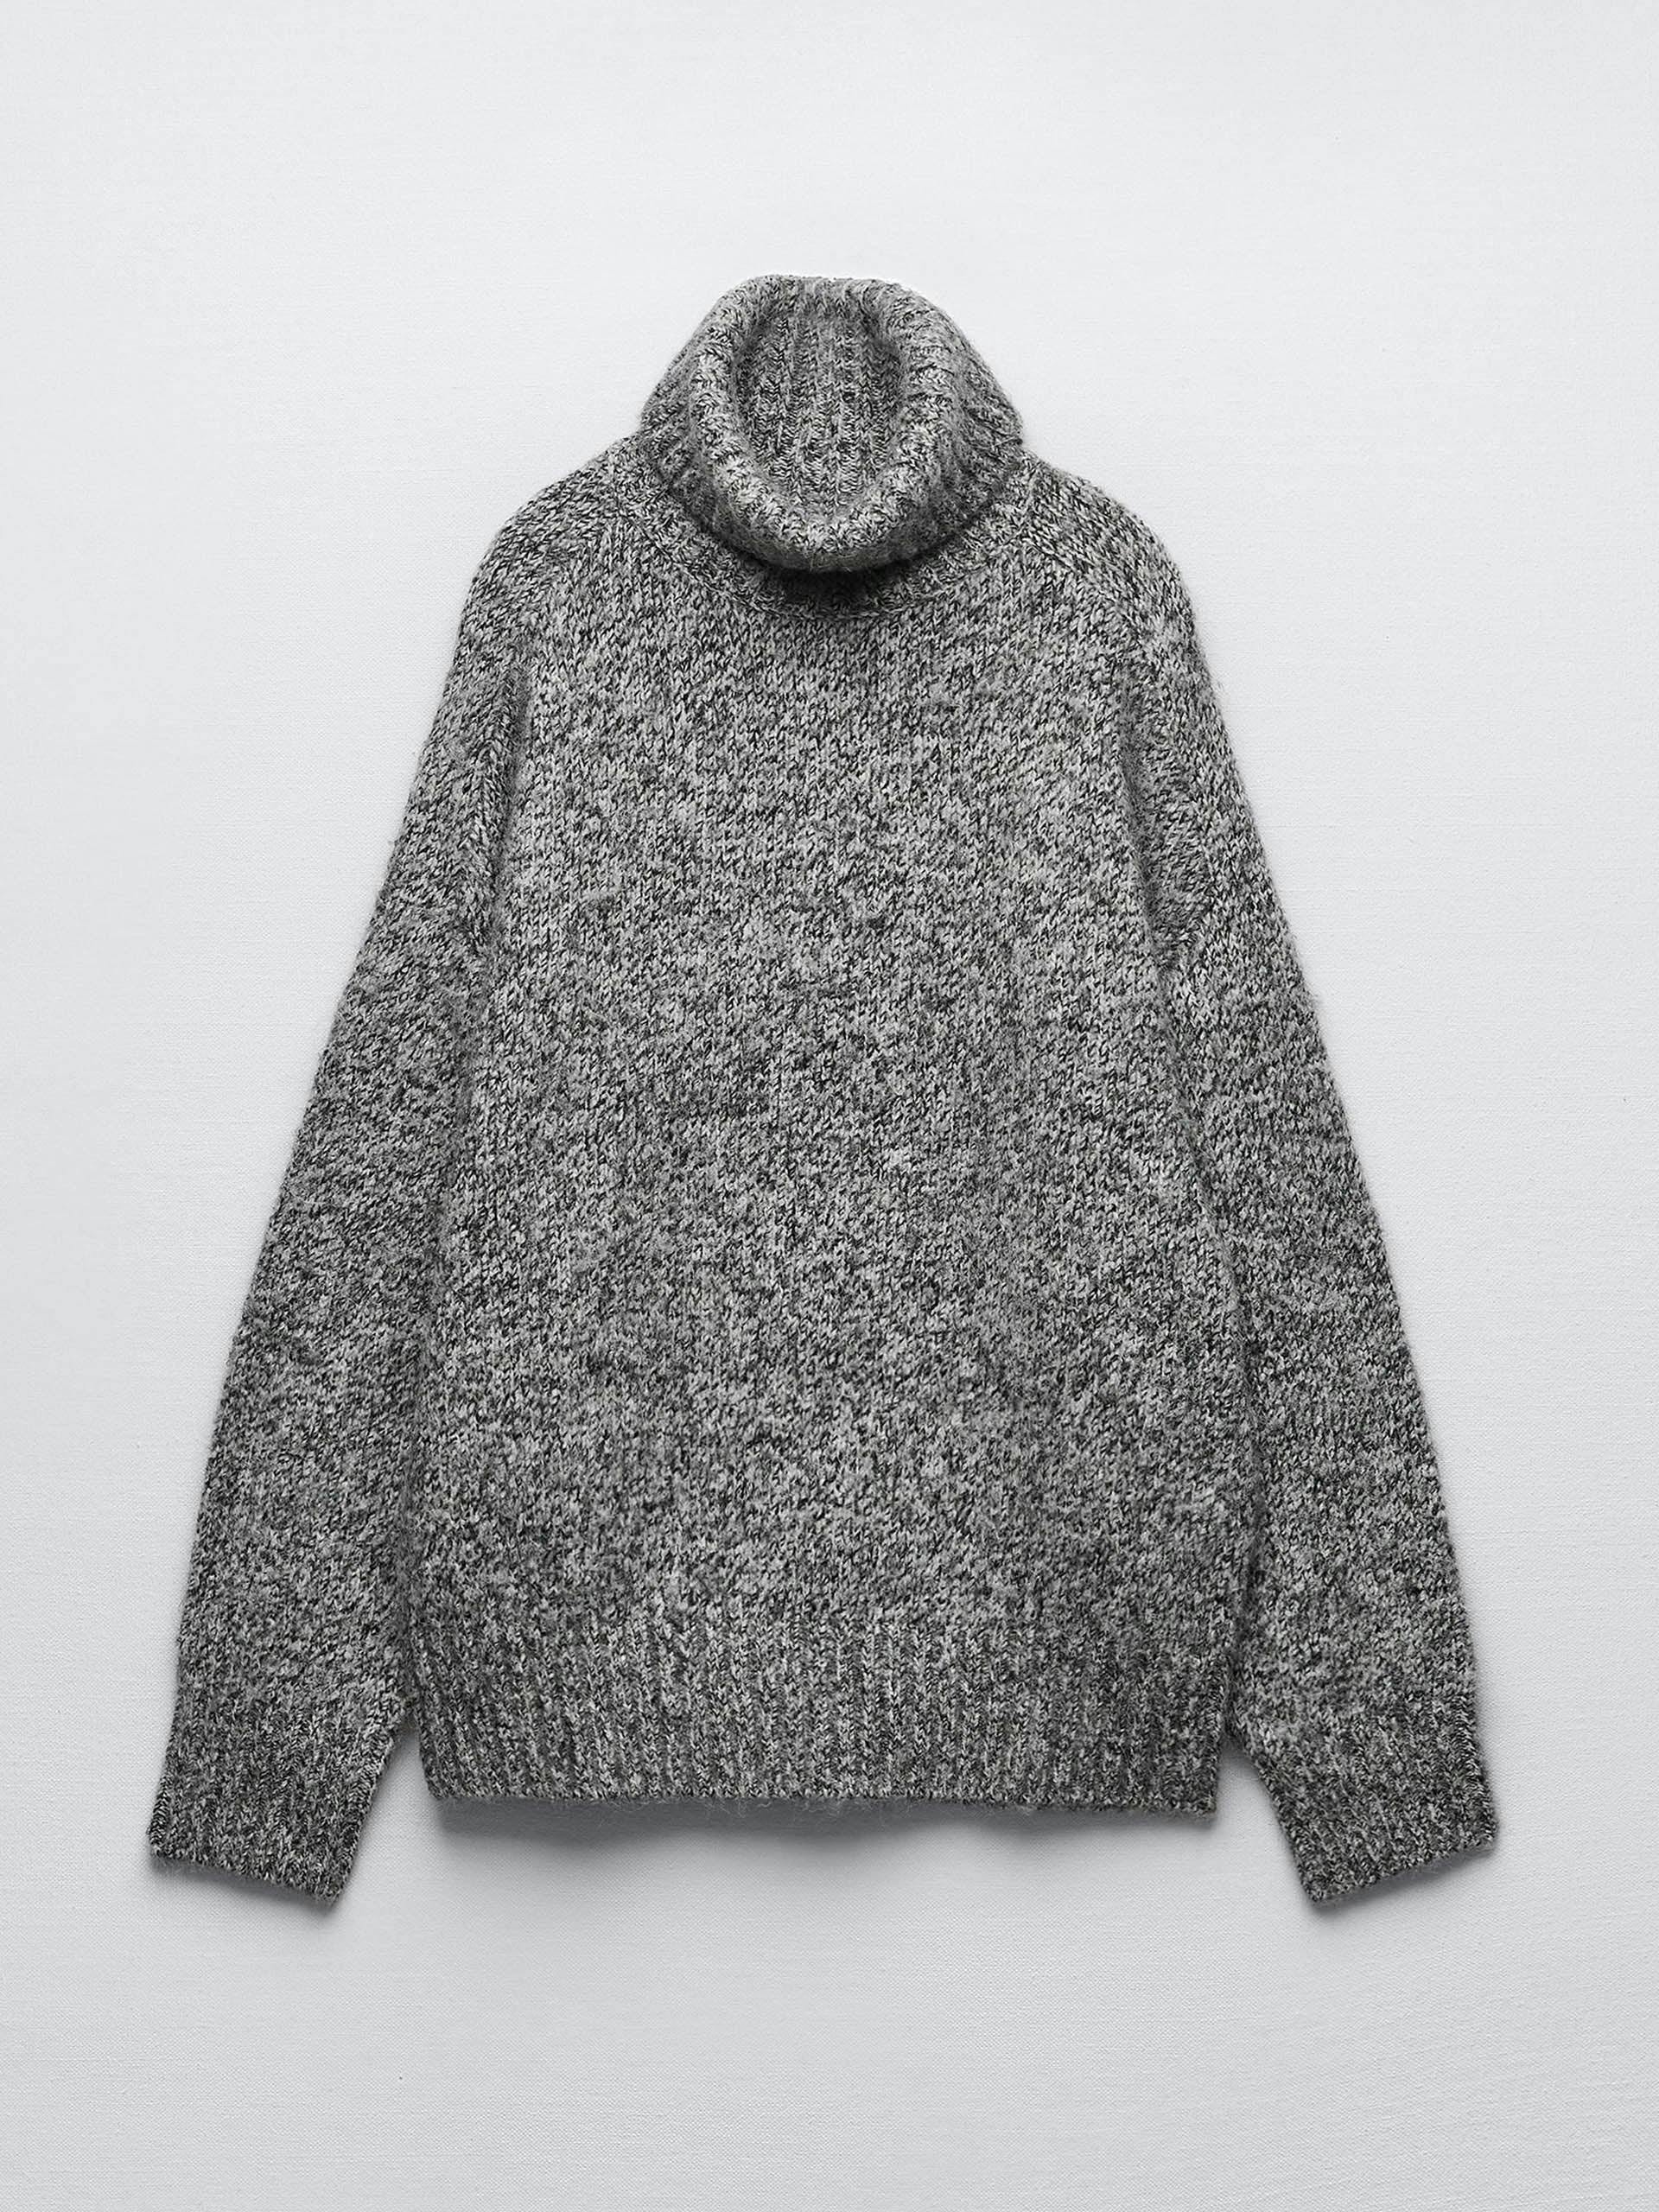 Cosy sweater with high neck